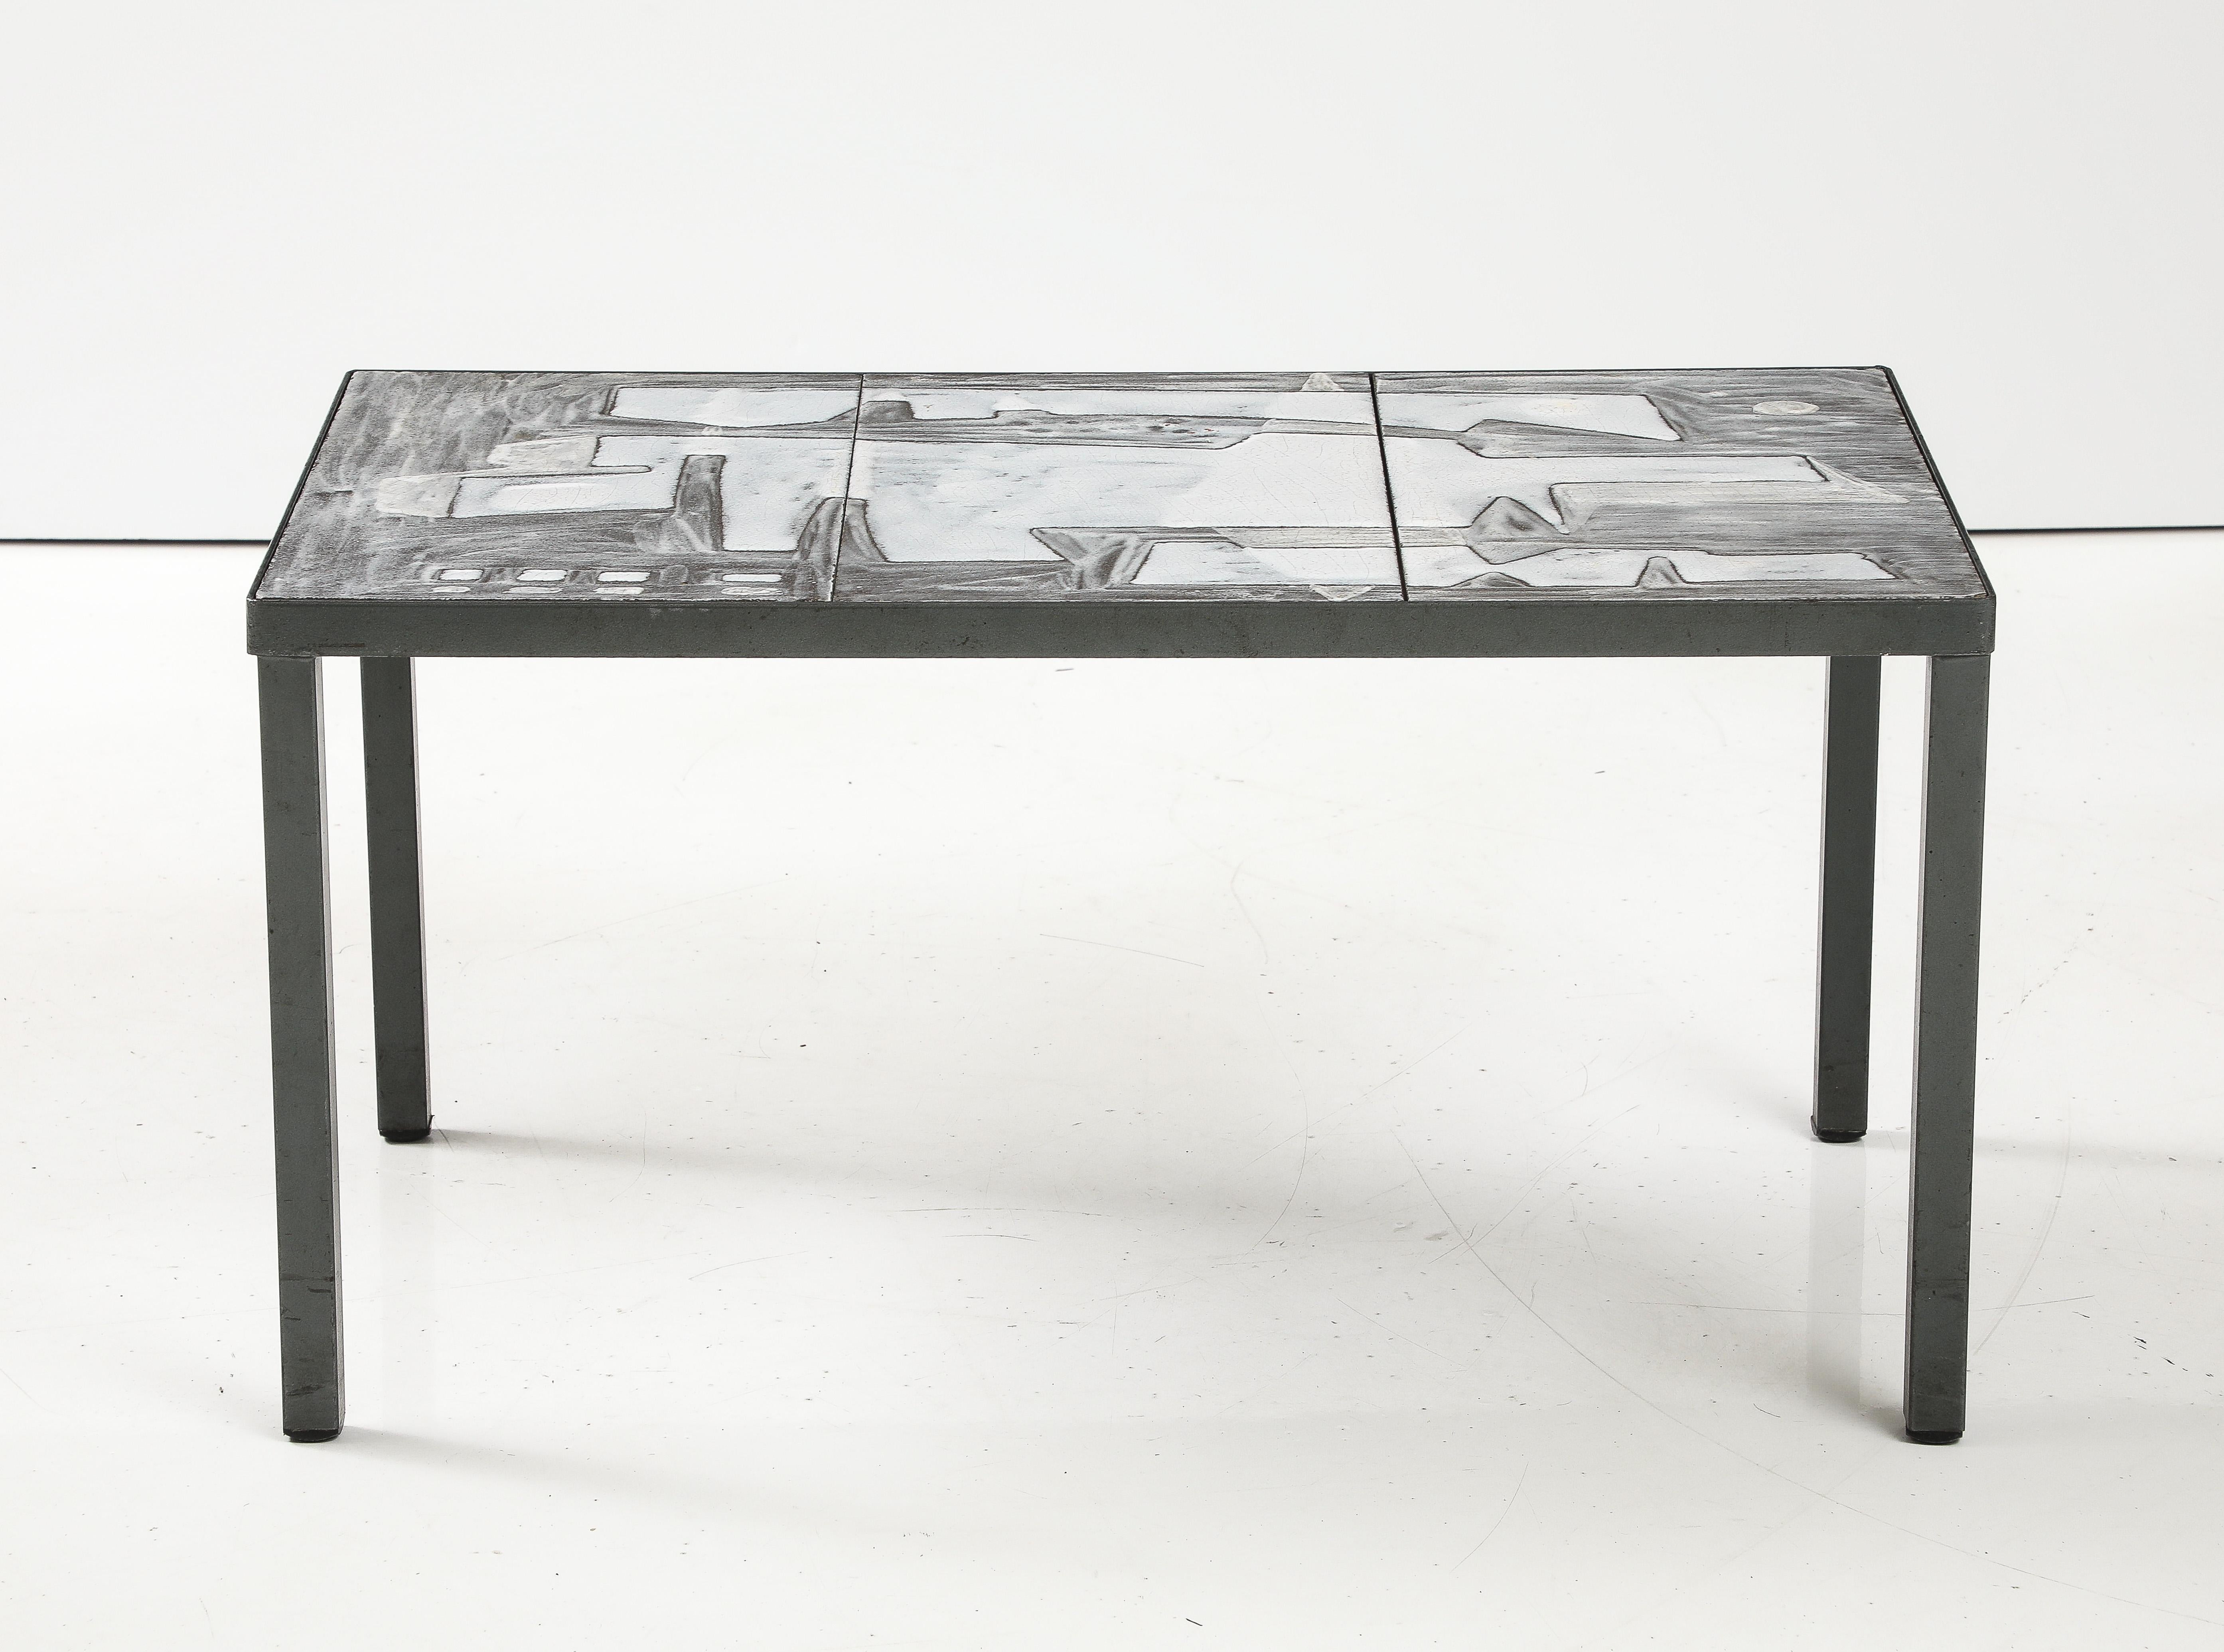 Robert (1930-2008) & Jean (1930-2015) Cloutier
Lava Stone Tile Top Coffee Table in white grey abstract design
H: 15.5 D: 18 W: 30 inches

It is special in that is the white and grey series, and the white is slightly in relief